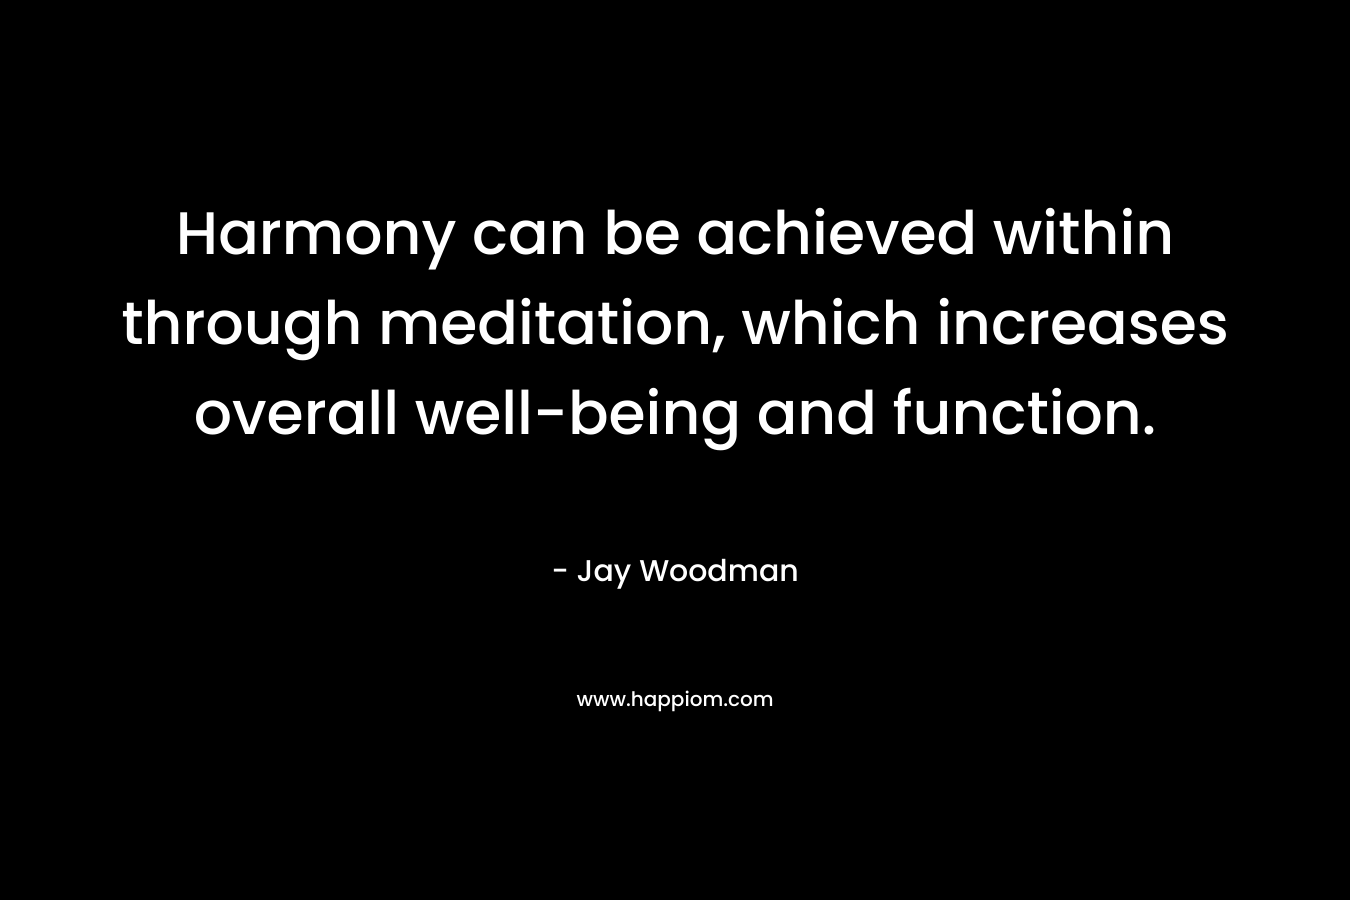 Harmony can be achieved within through meditation, which increases overall well-being and function.